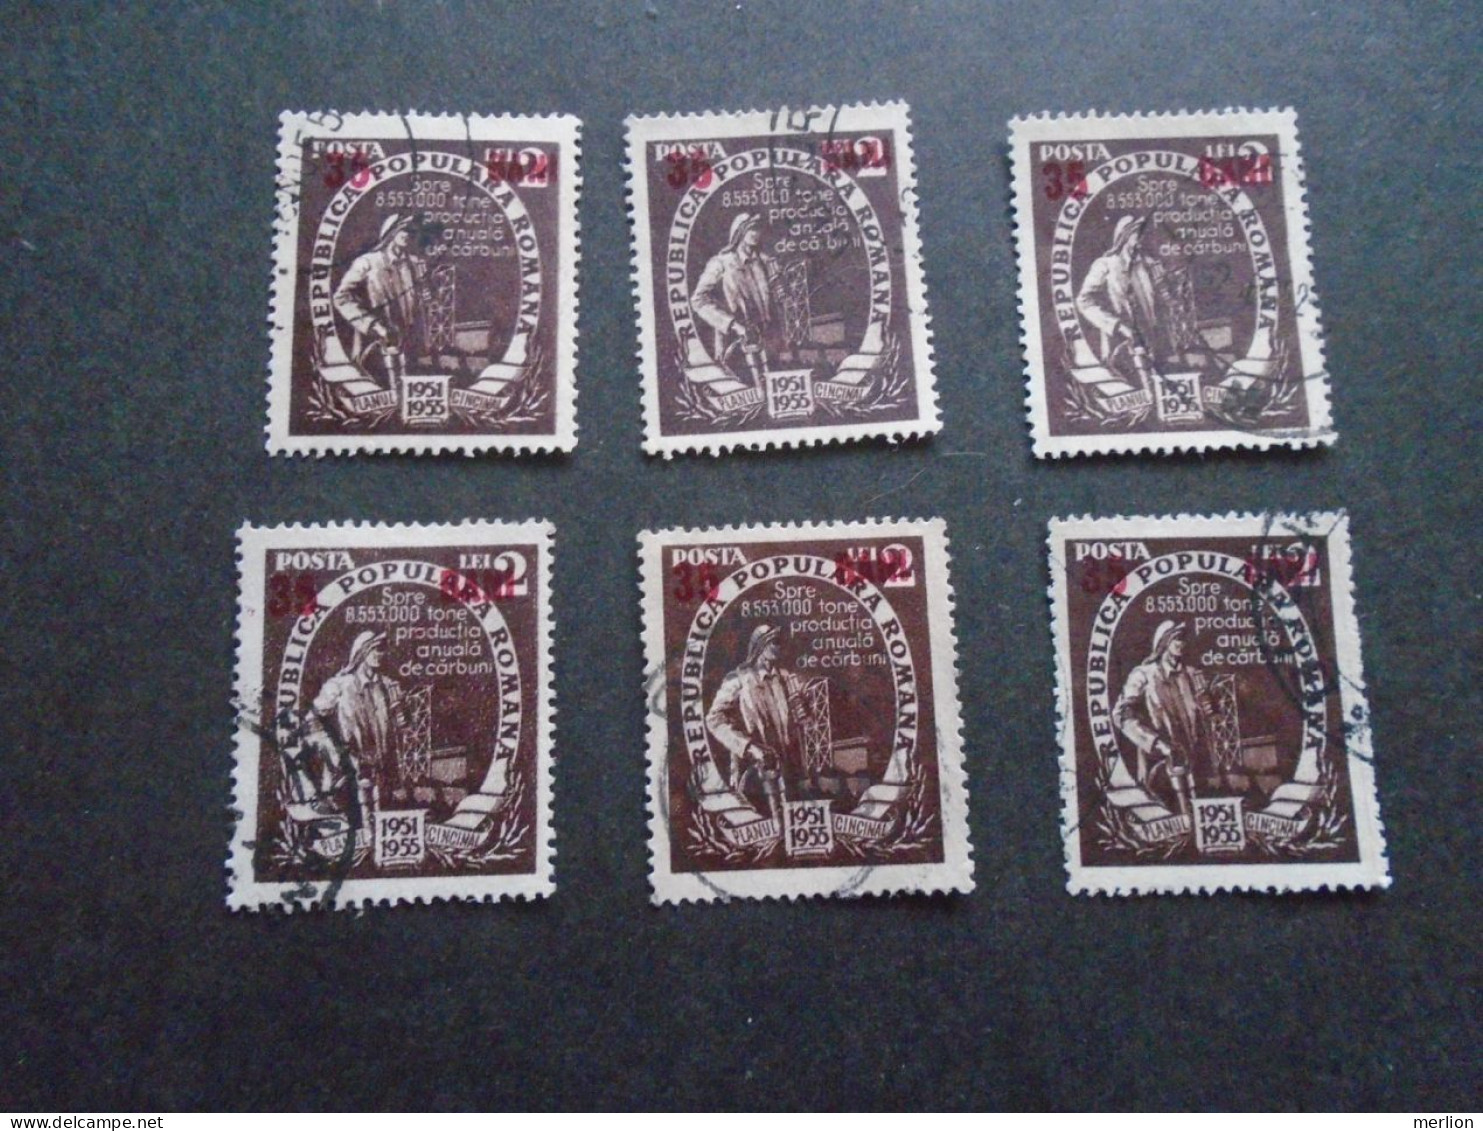 D202265   Romania  1955  - 6 Pcs Of Used Stamps  1354Y - Usati